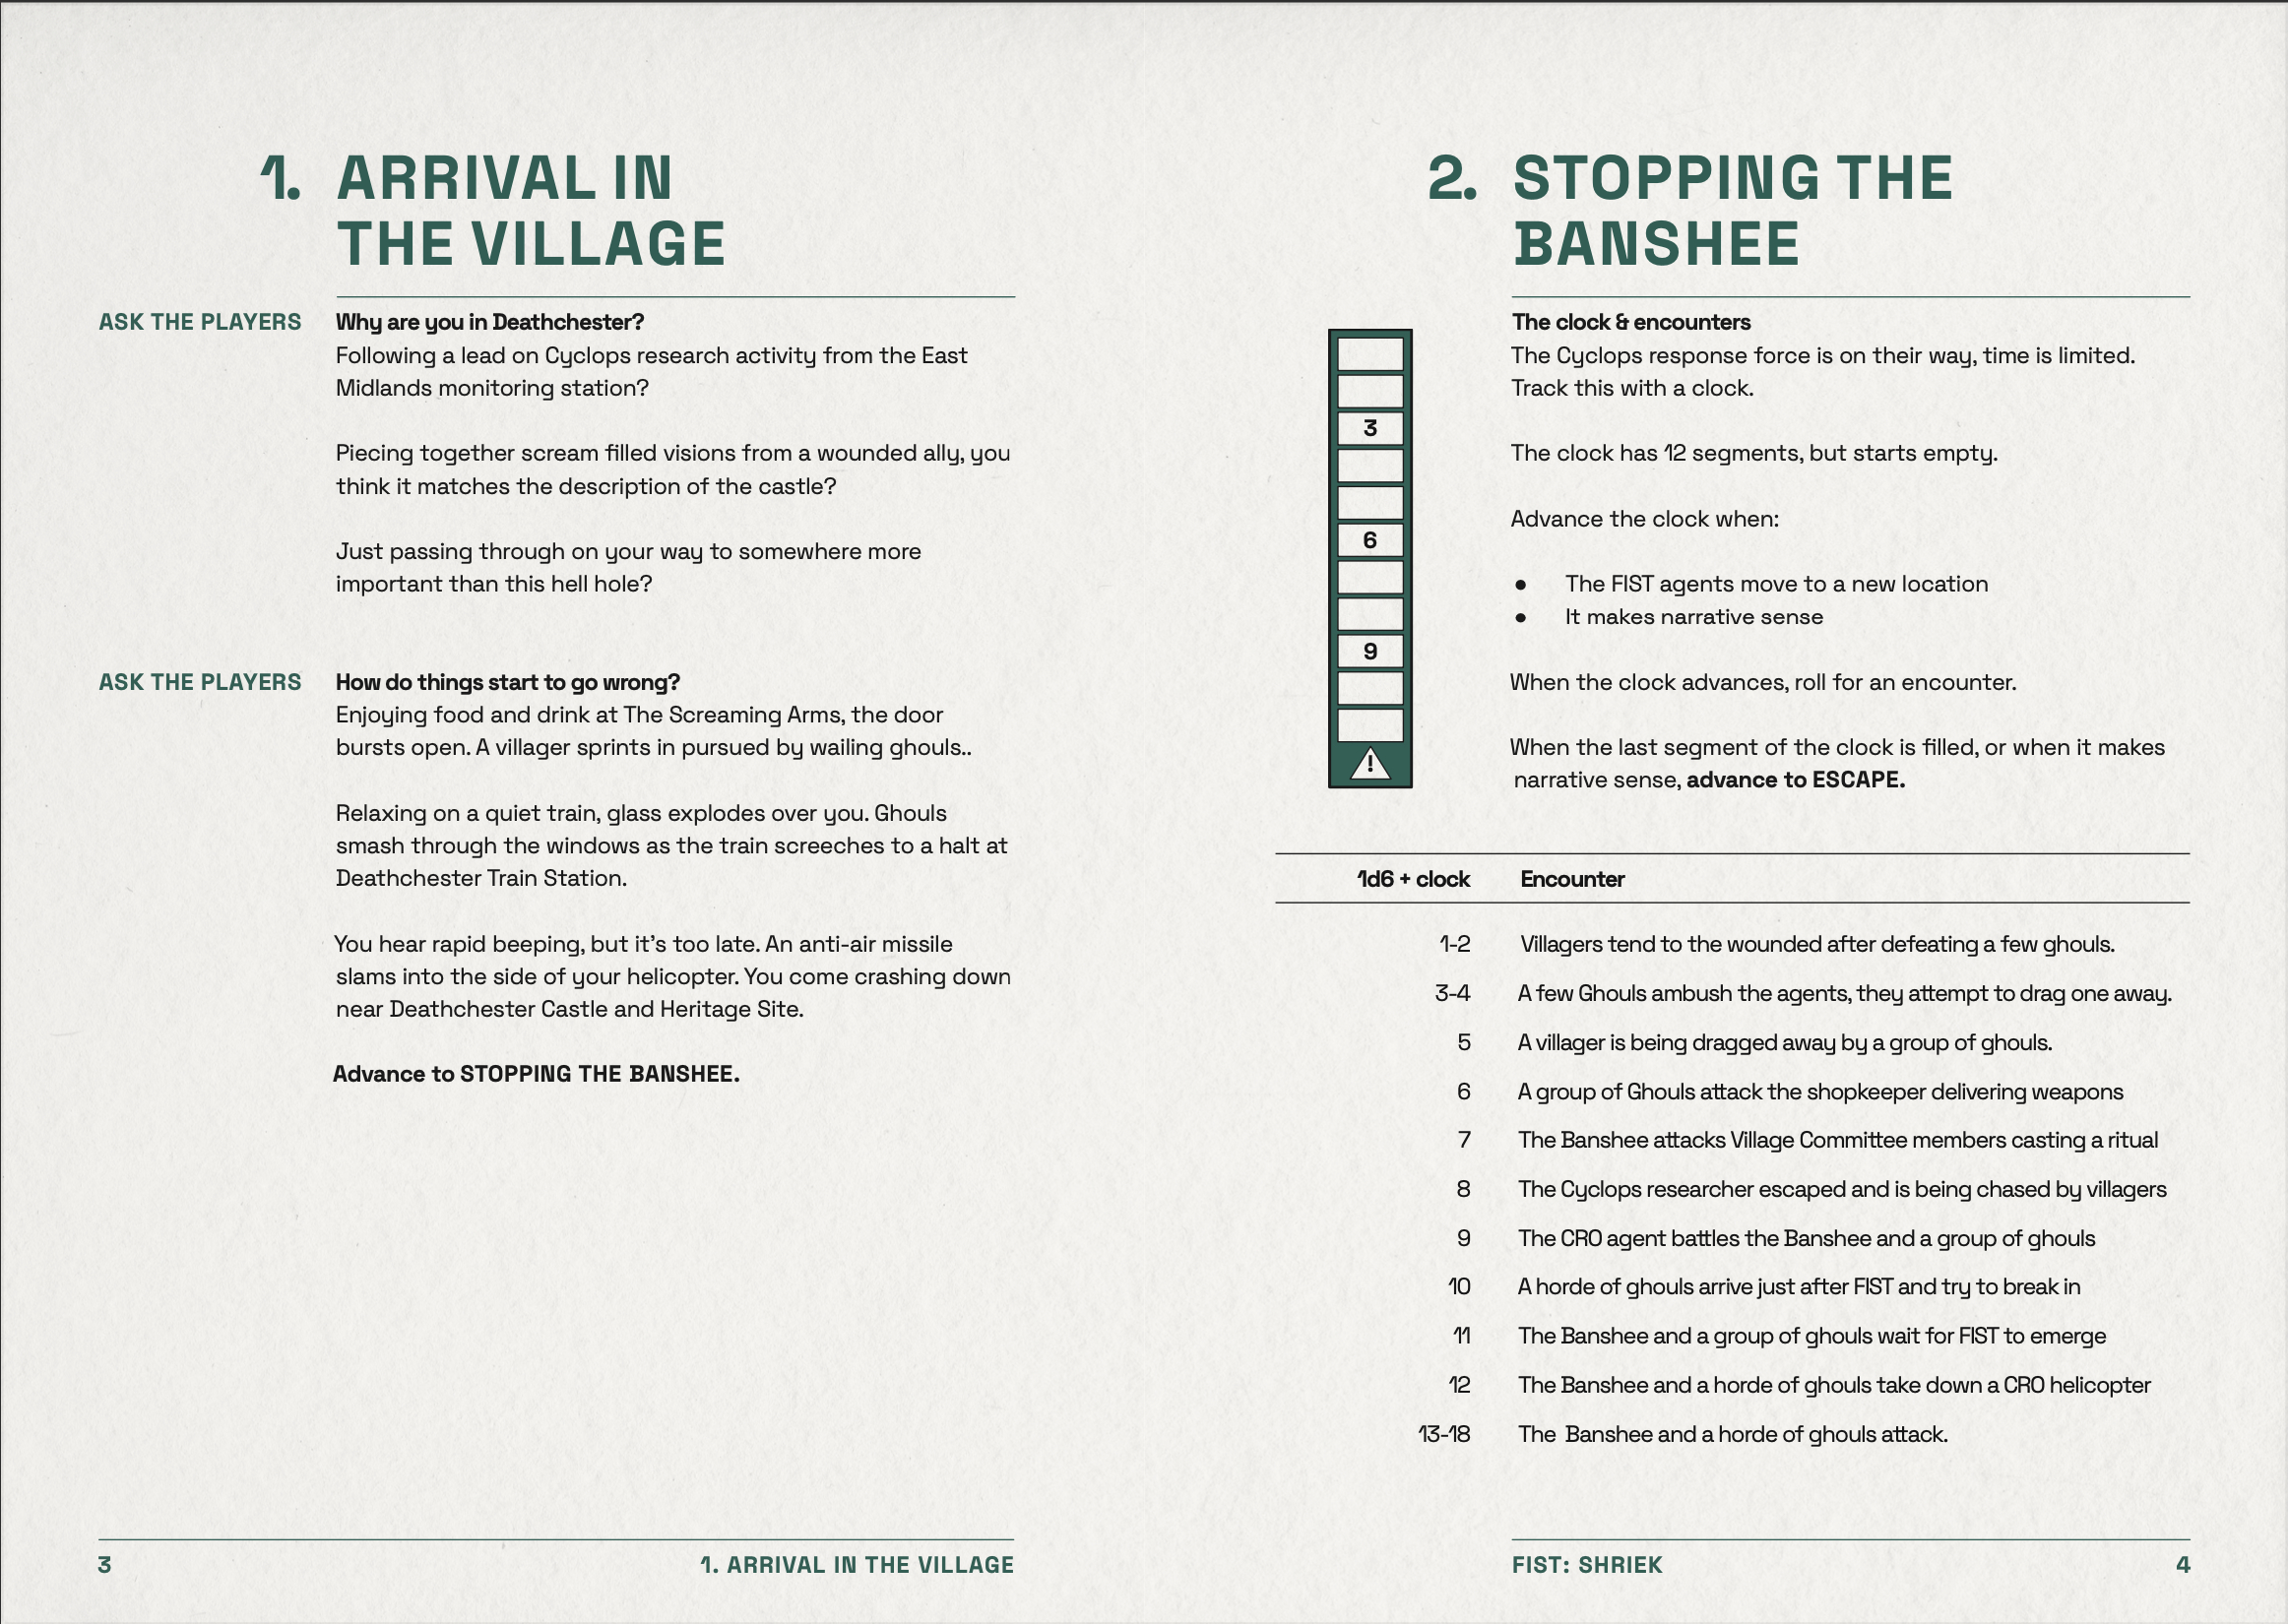 A spread showing the introduction (arrival in the village) and start of the scenario (stopping the banshee)